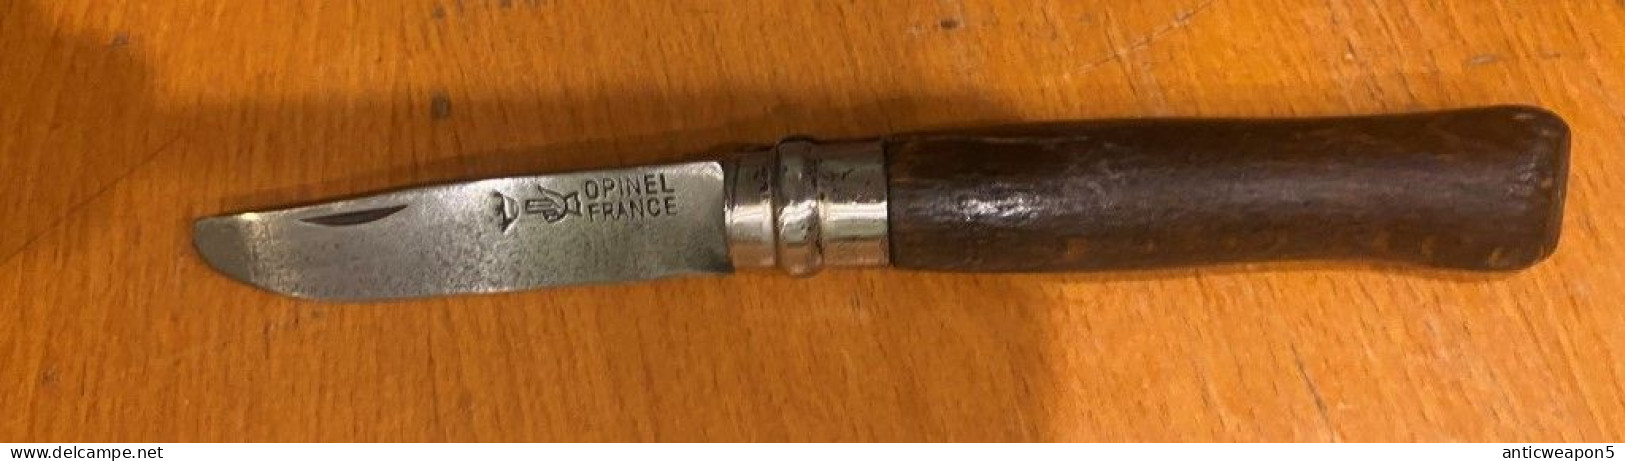 Couteau OPINEL. France. (H291) - Armes Blanches